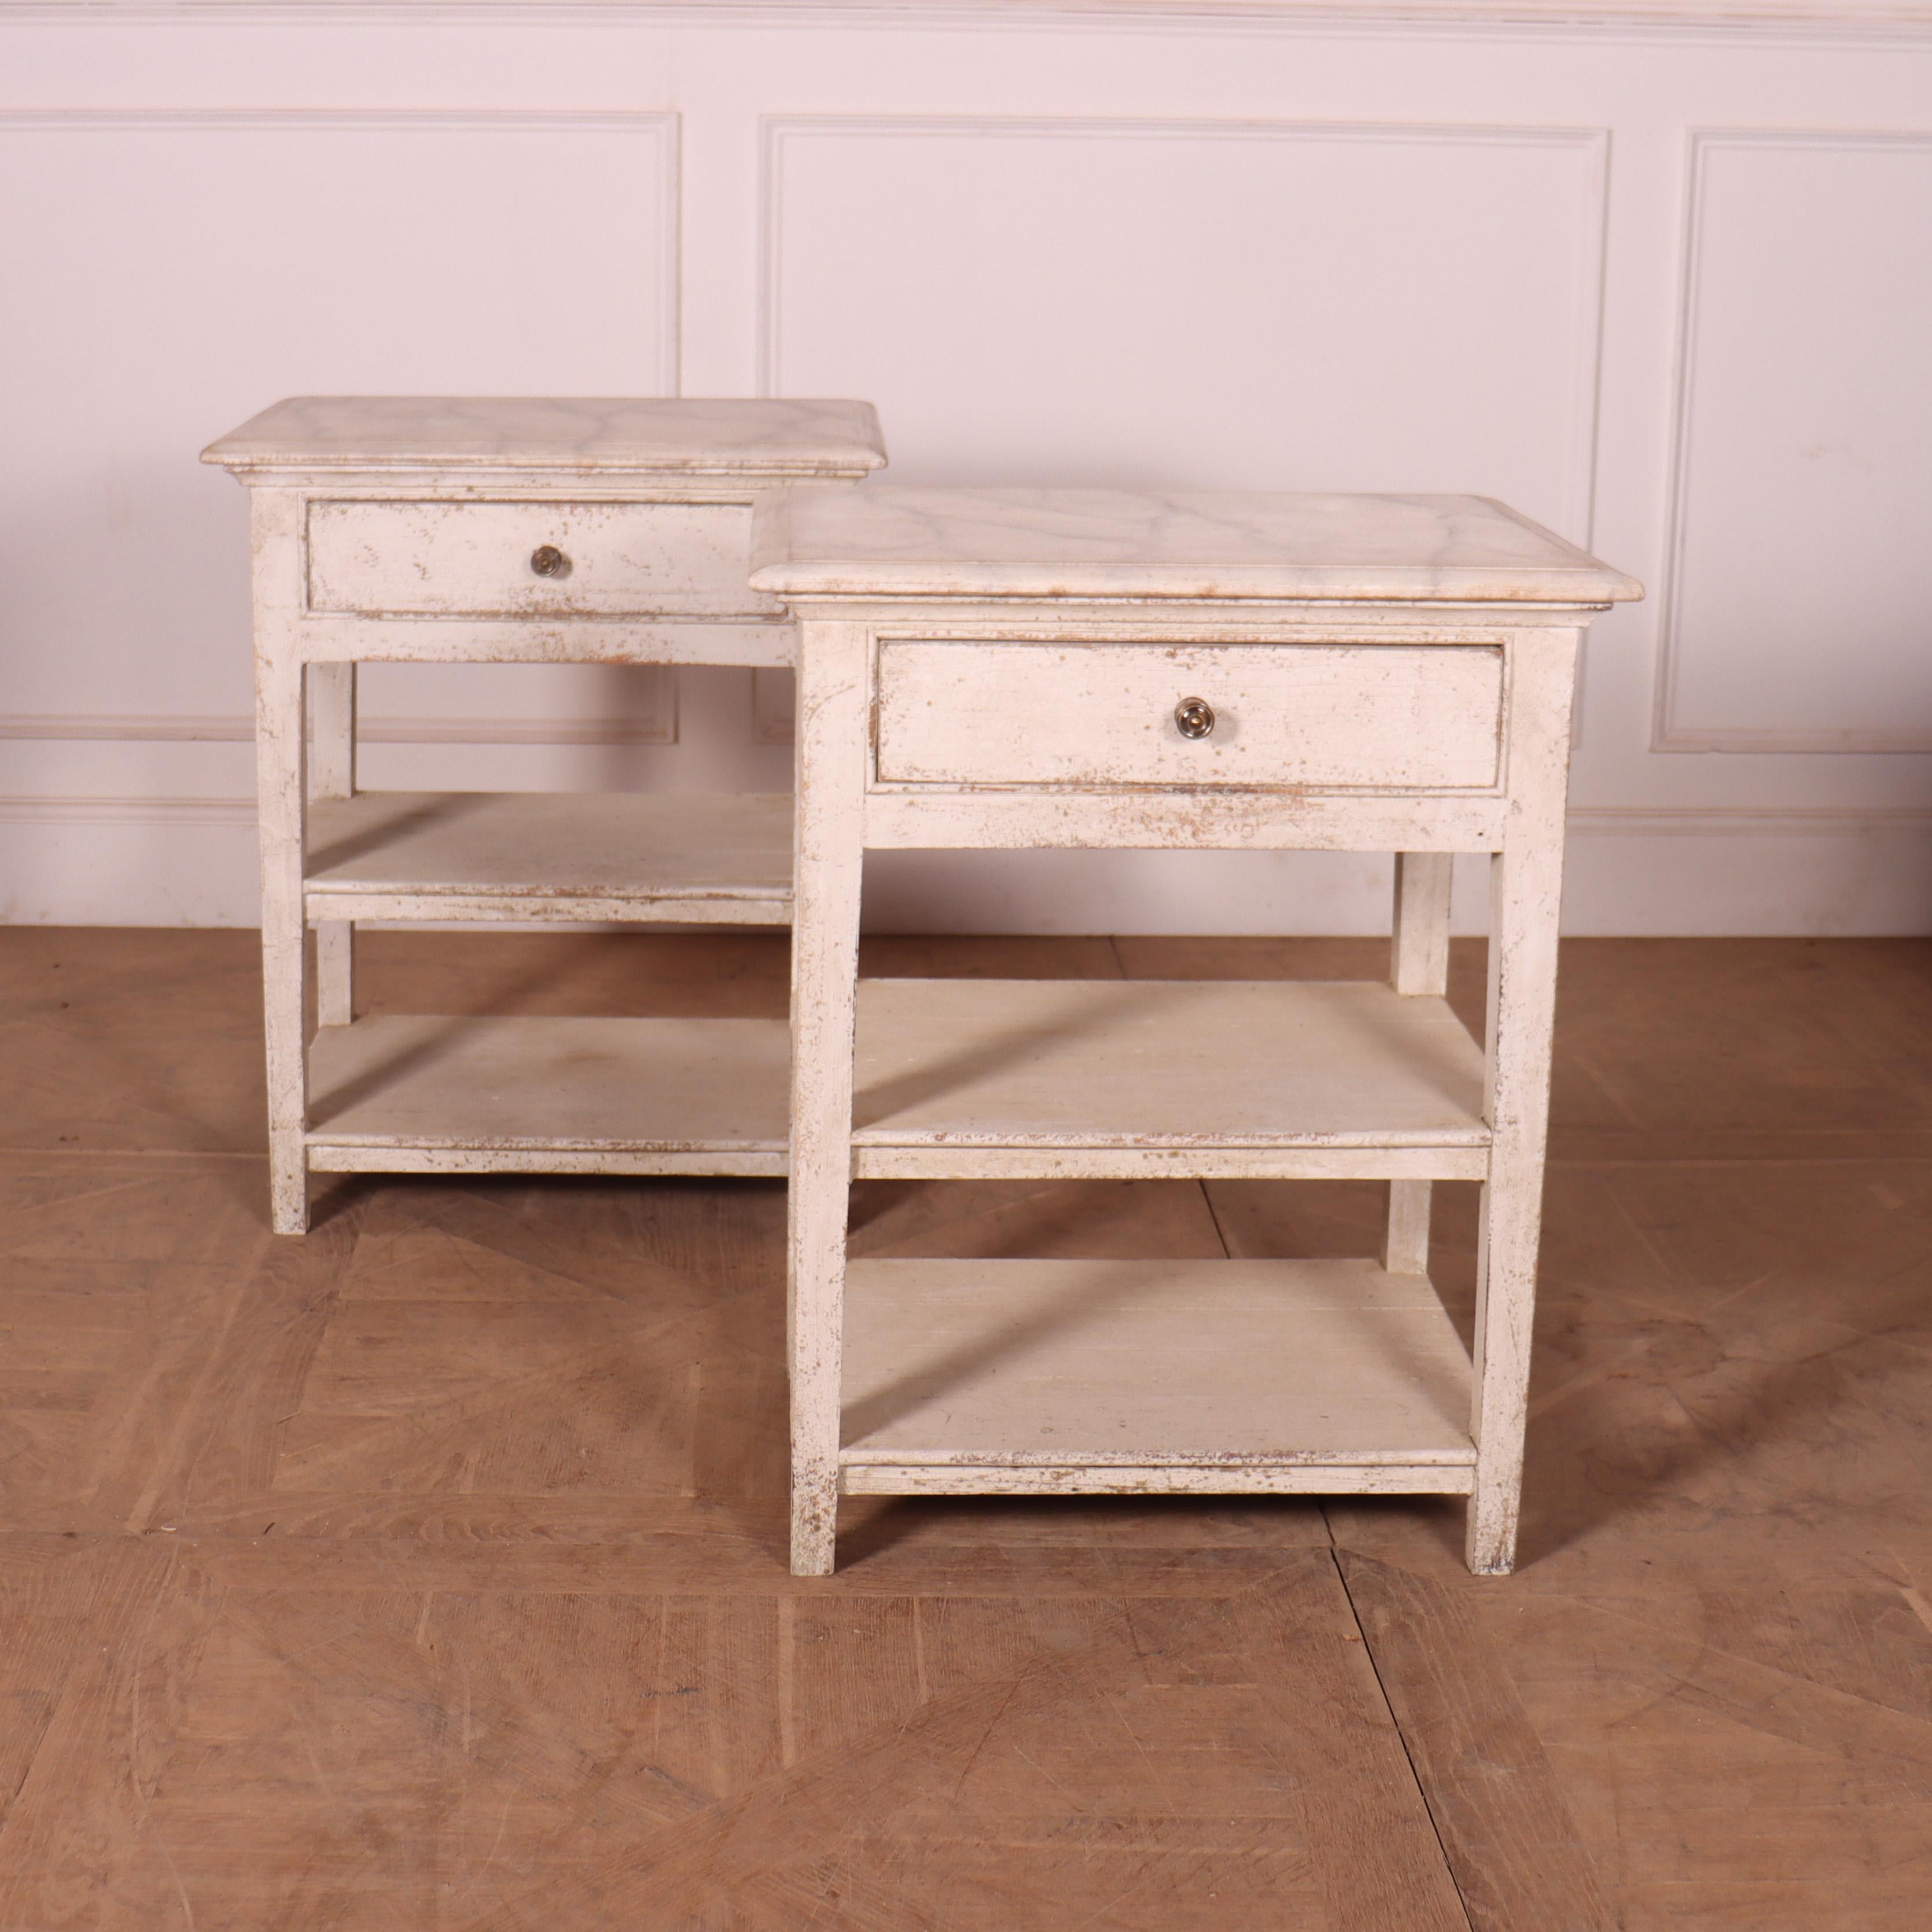 Pair of 19th C English 1 drawer bedside tables with faux marble tops. 1890

Reference: 8206

Dimensions
24.5 inches (62 cms) Wide
18 inches (46 cms) Deep
30 inches (76 cms) High